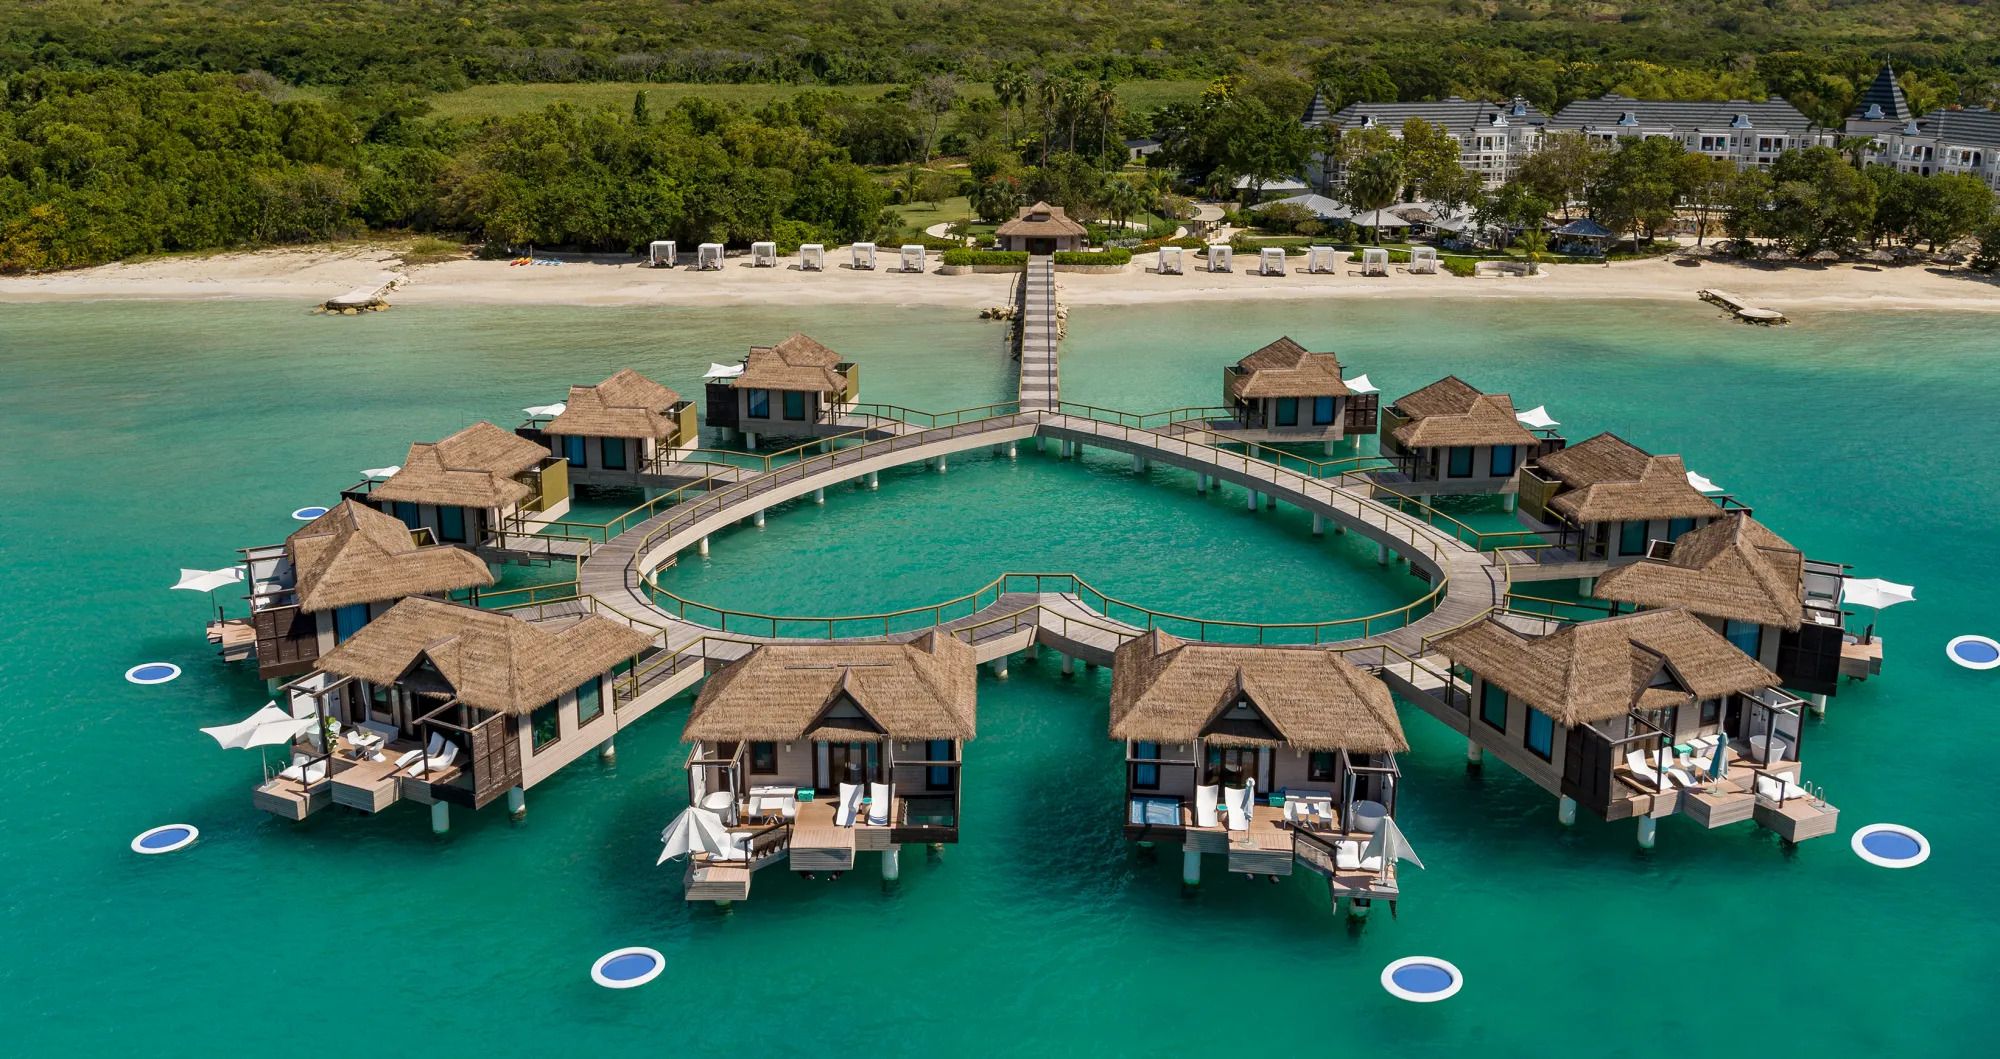 sandals-south-coast-overwater-bungalows-jpg-2